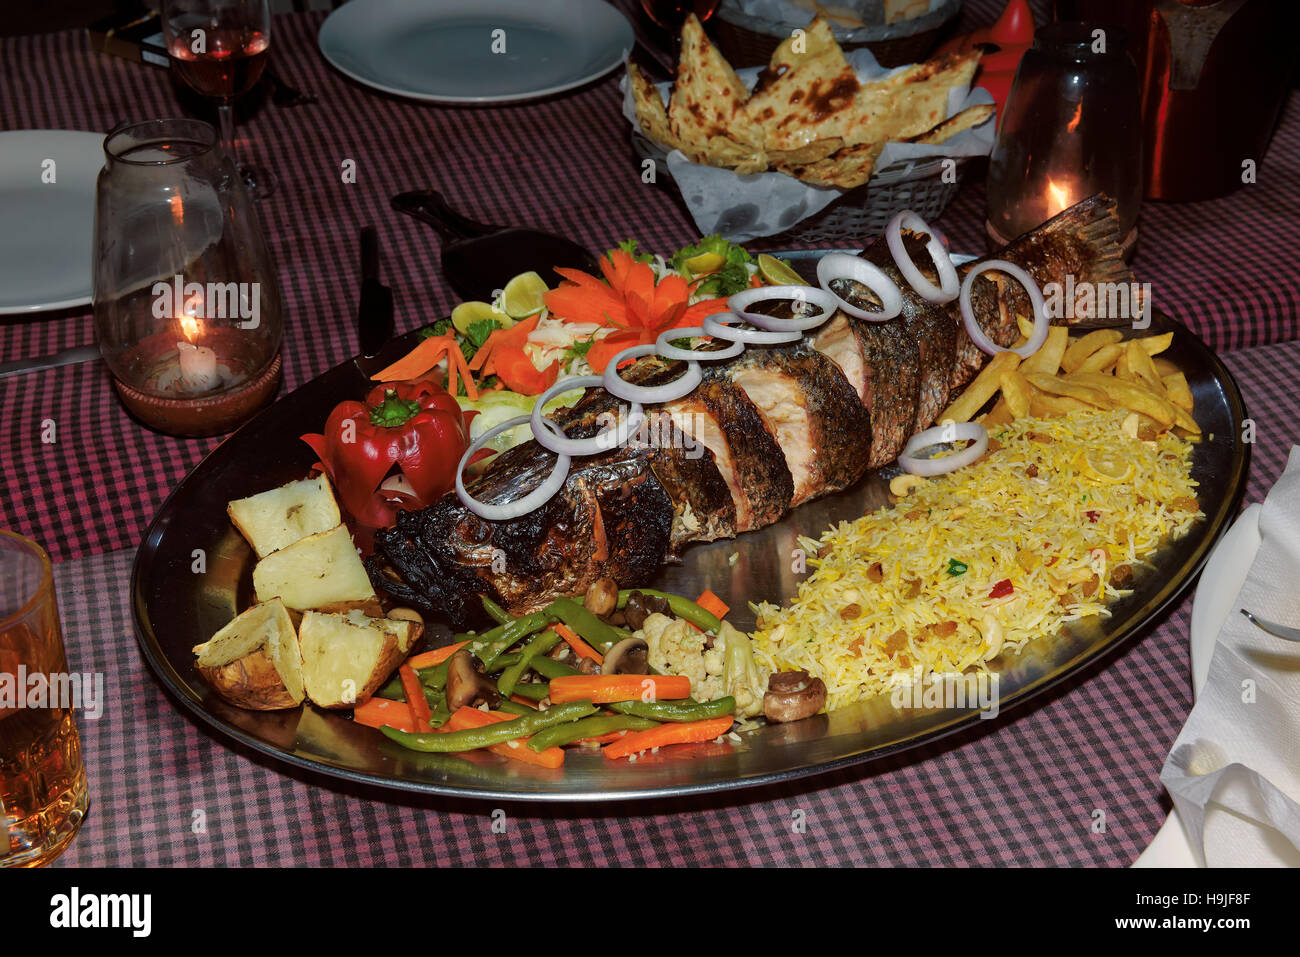 Sea fish cooked on the Tandoori with rice and vegetables. Stock Photo